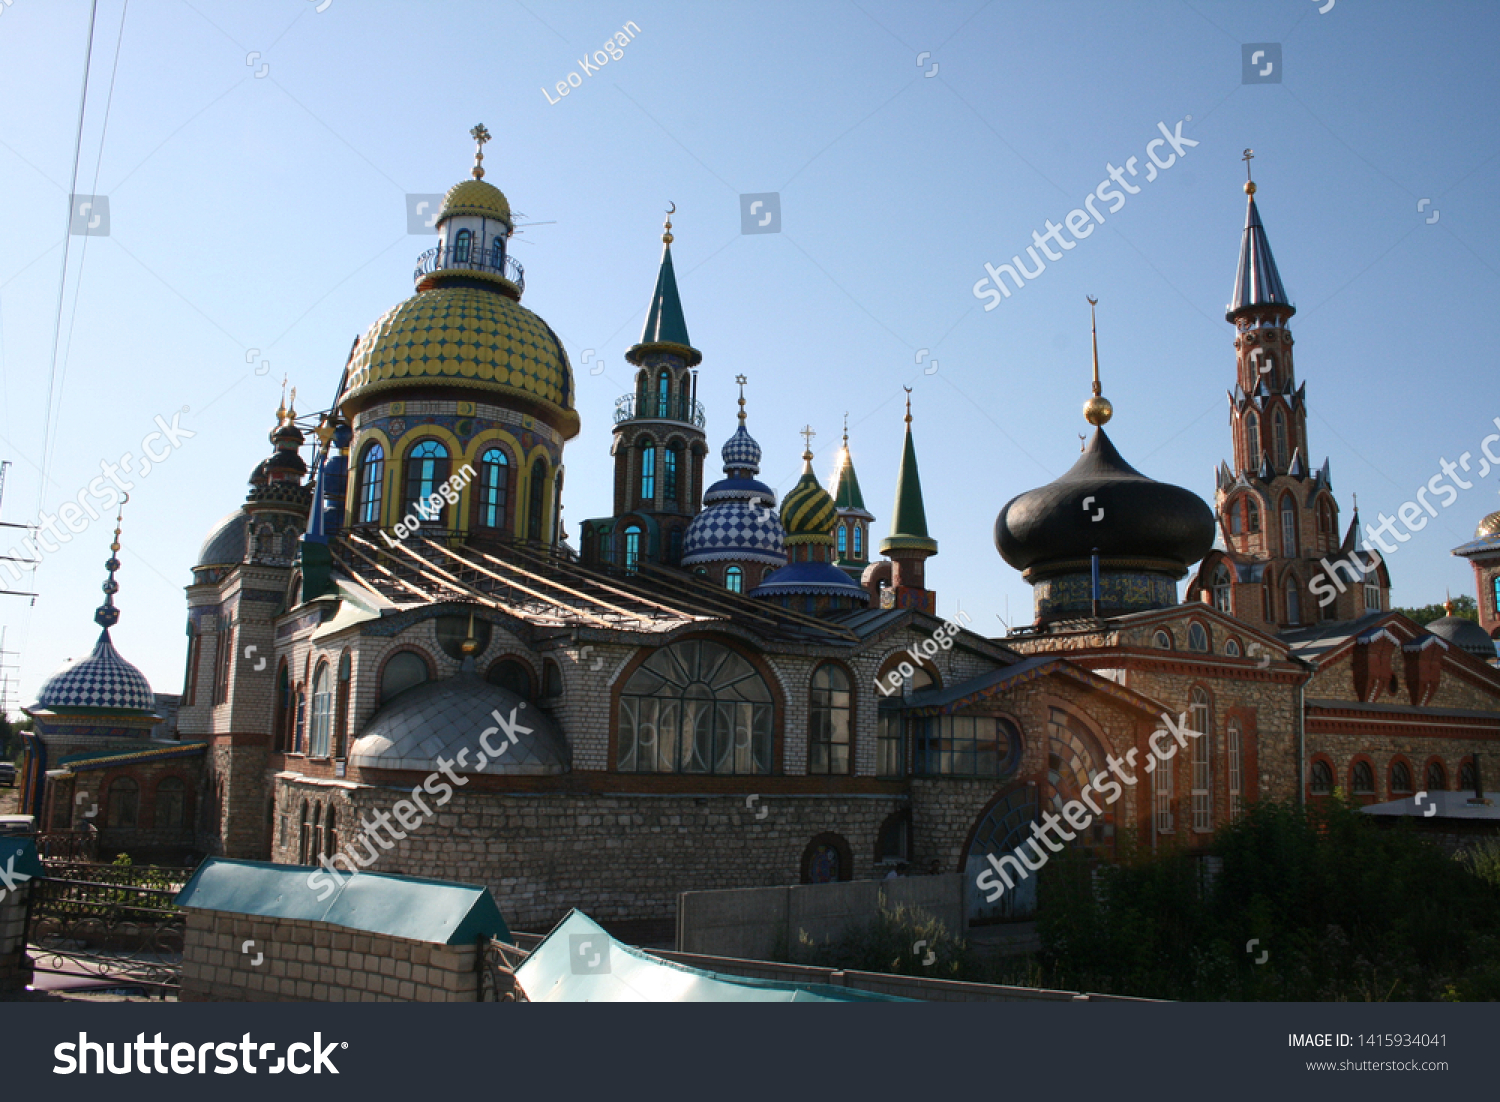 Buildings and architecture across Russia #1415934041